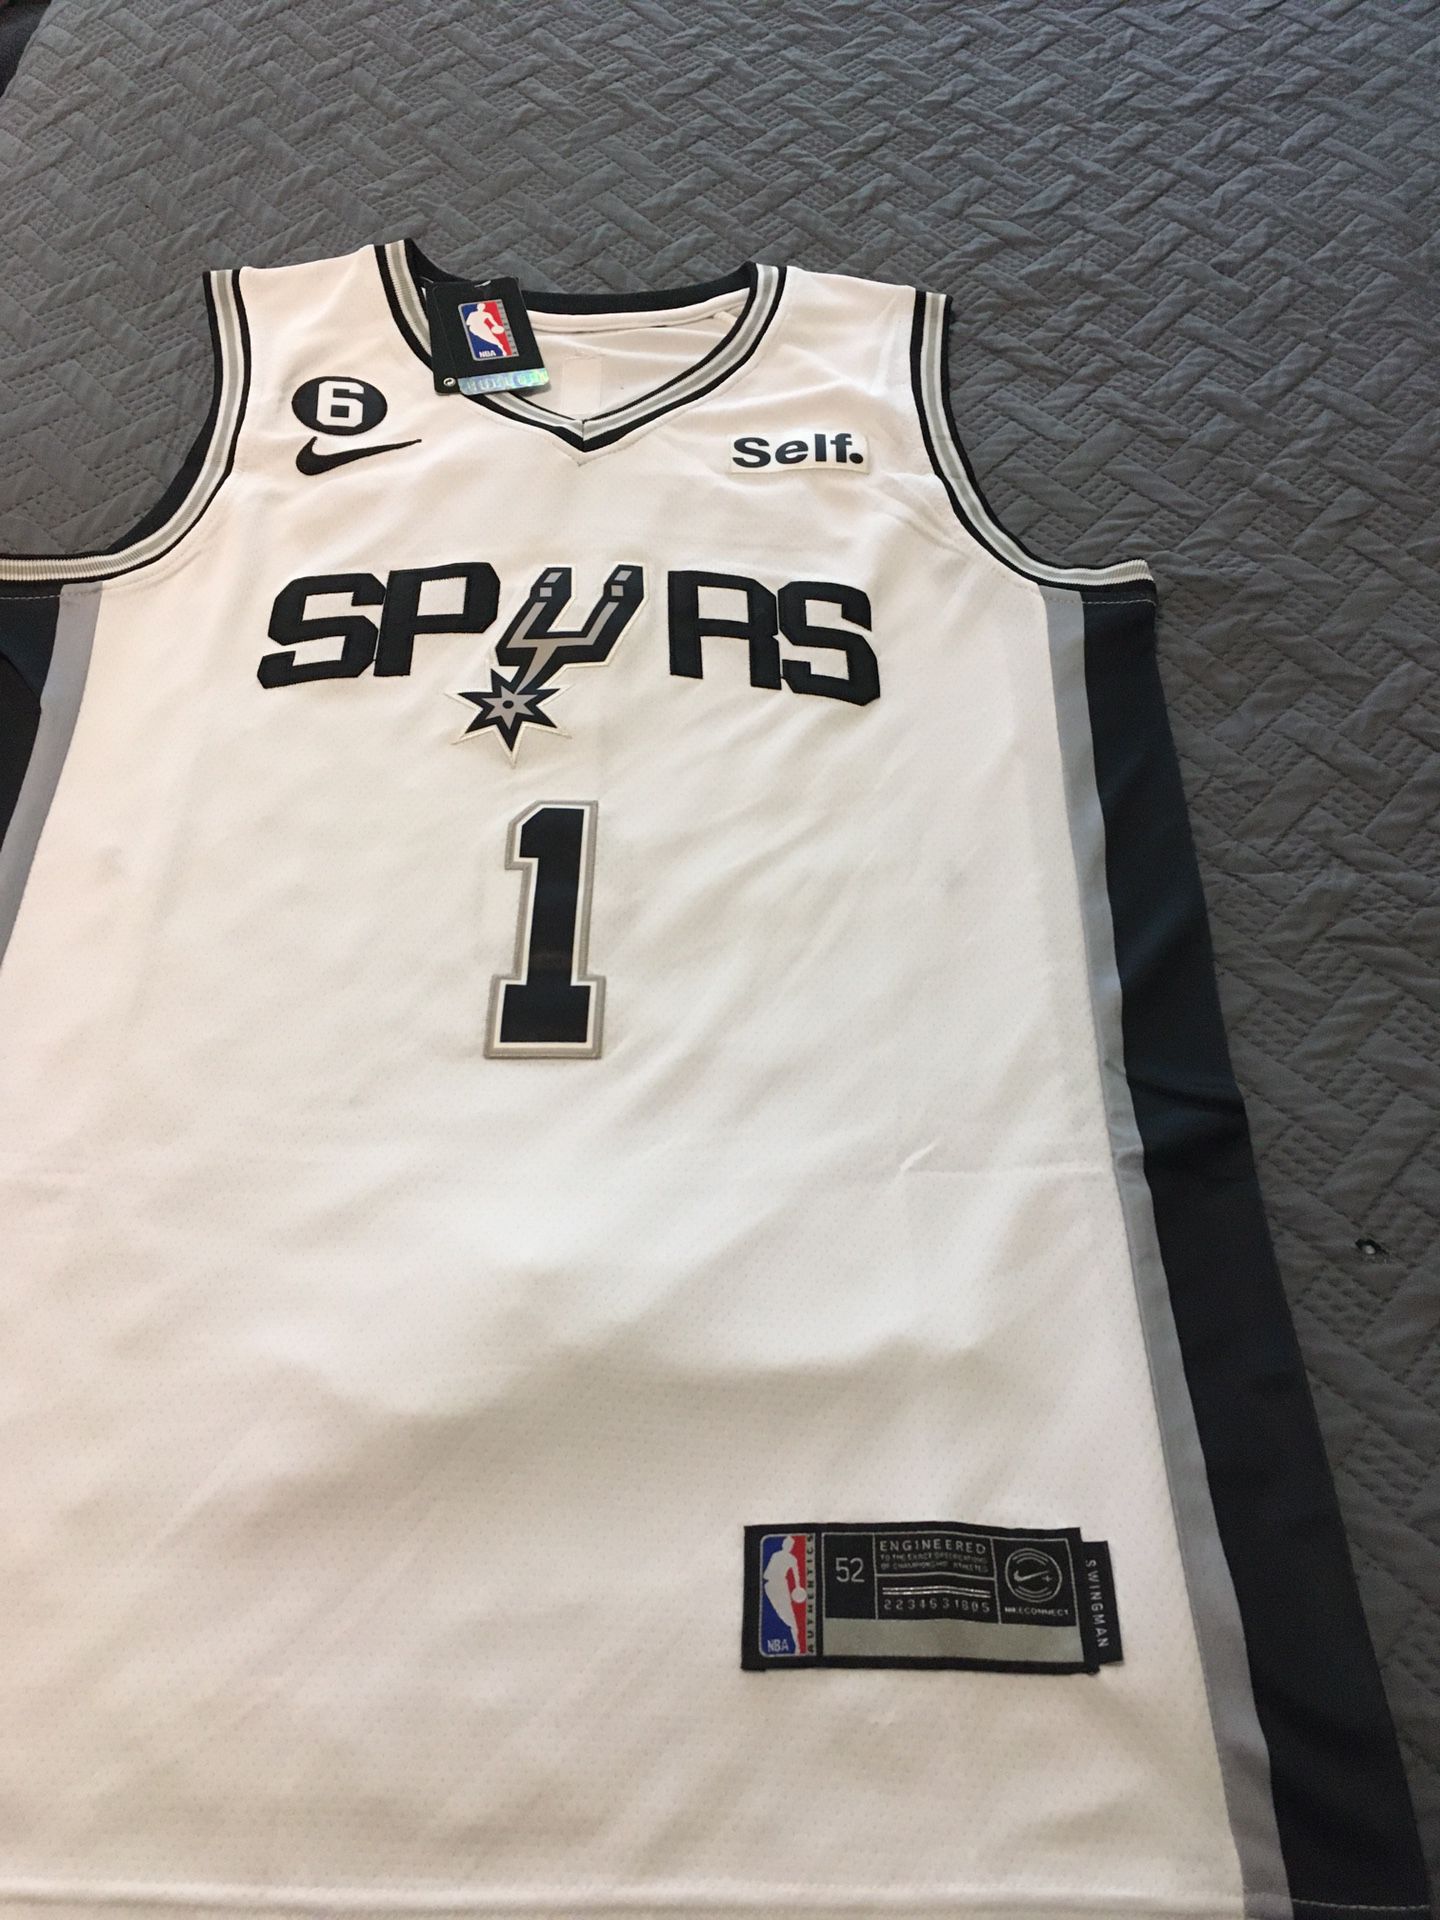 Victor Wembanyama Spurs jersey available for purchase